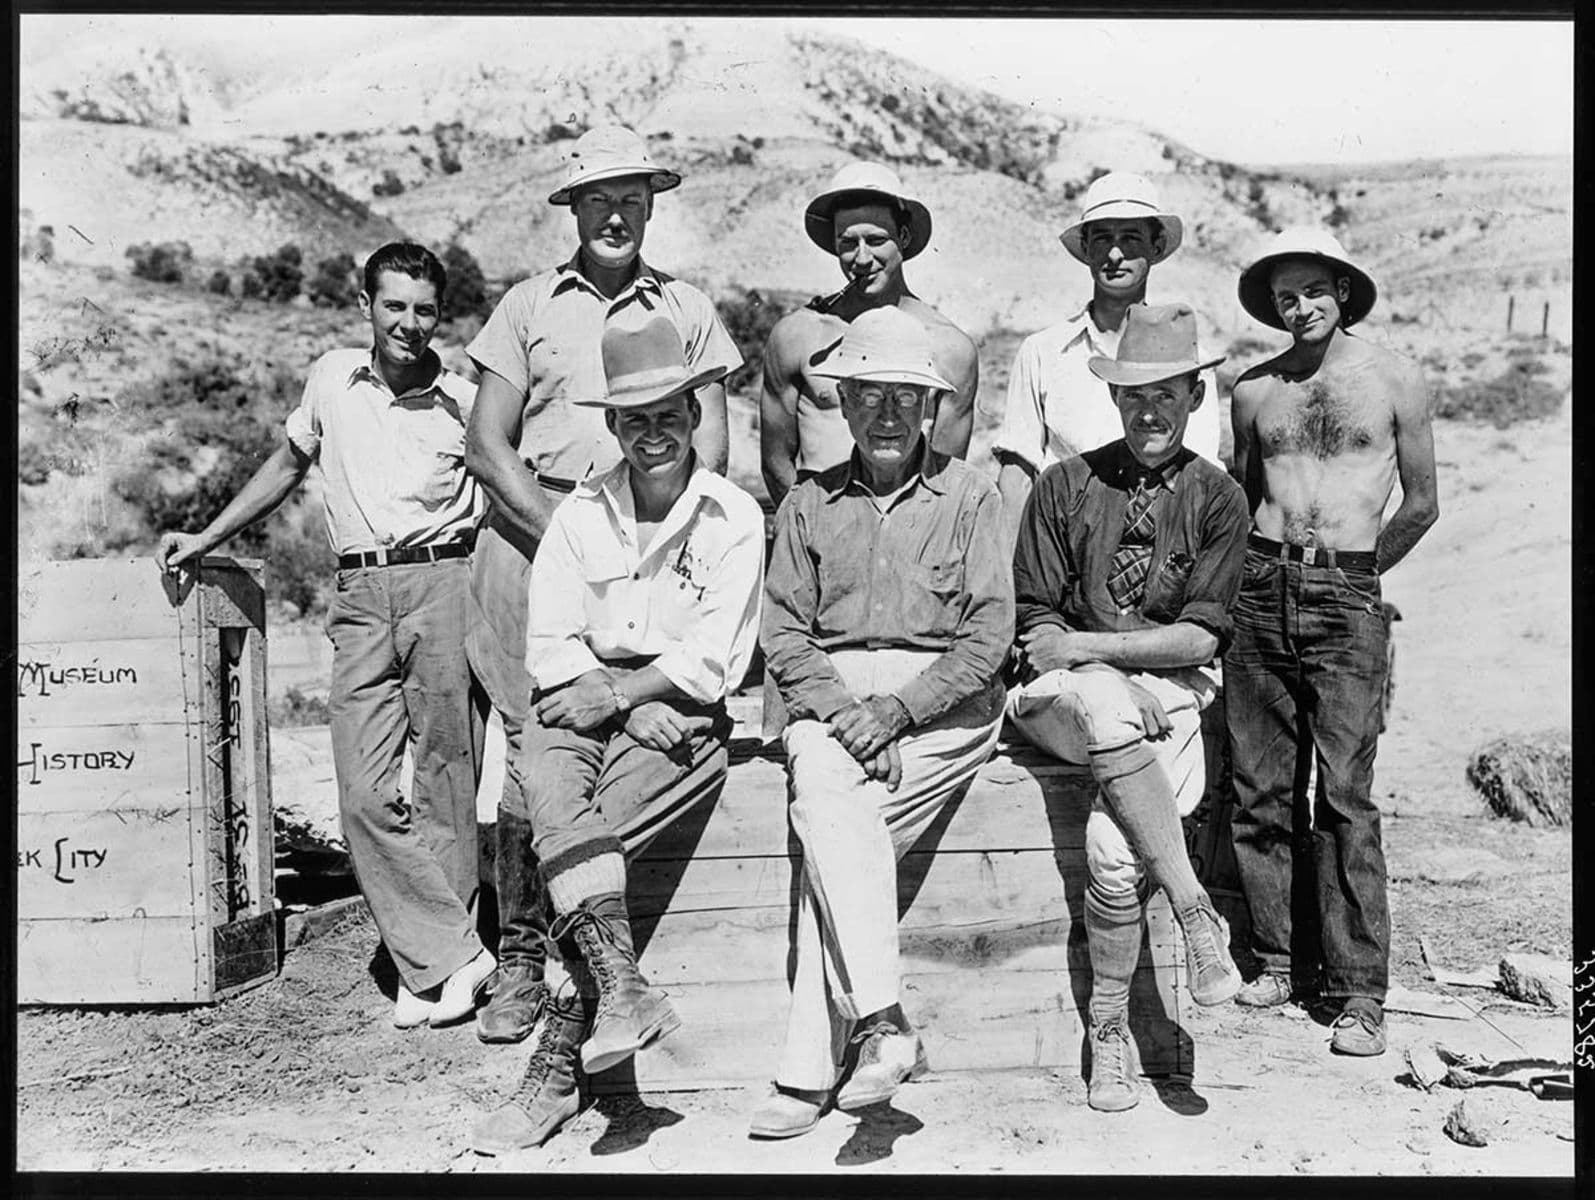 Barnum Brown and his field crew.